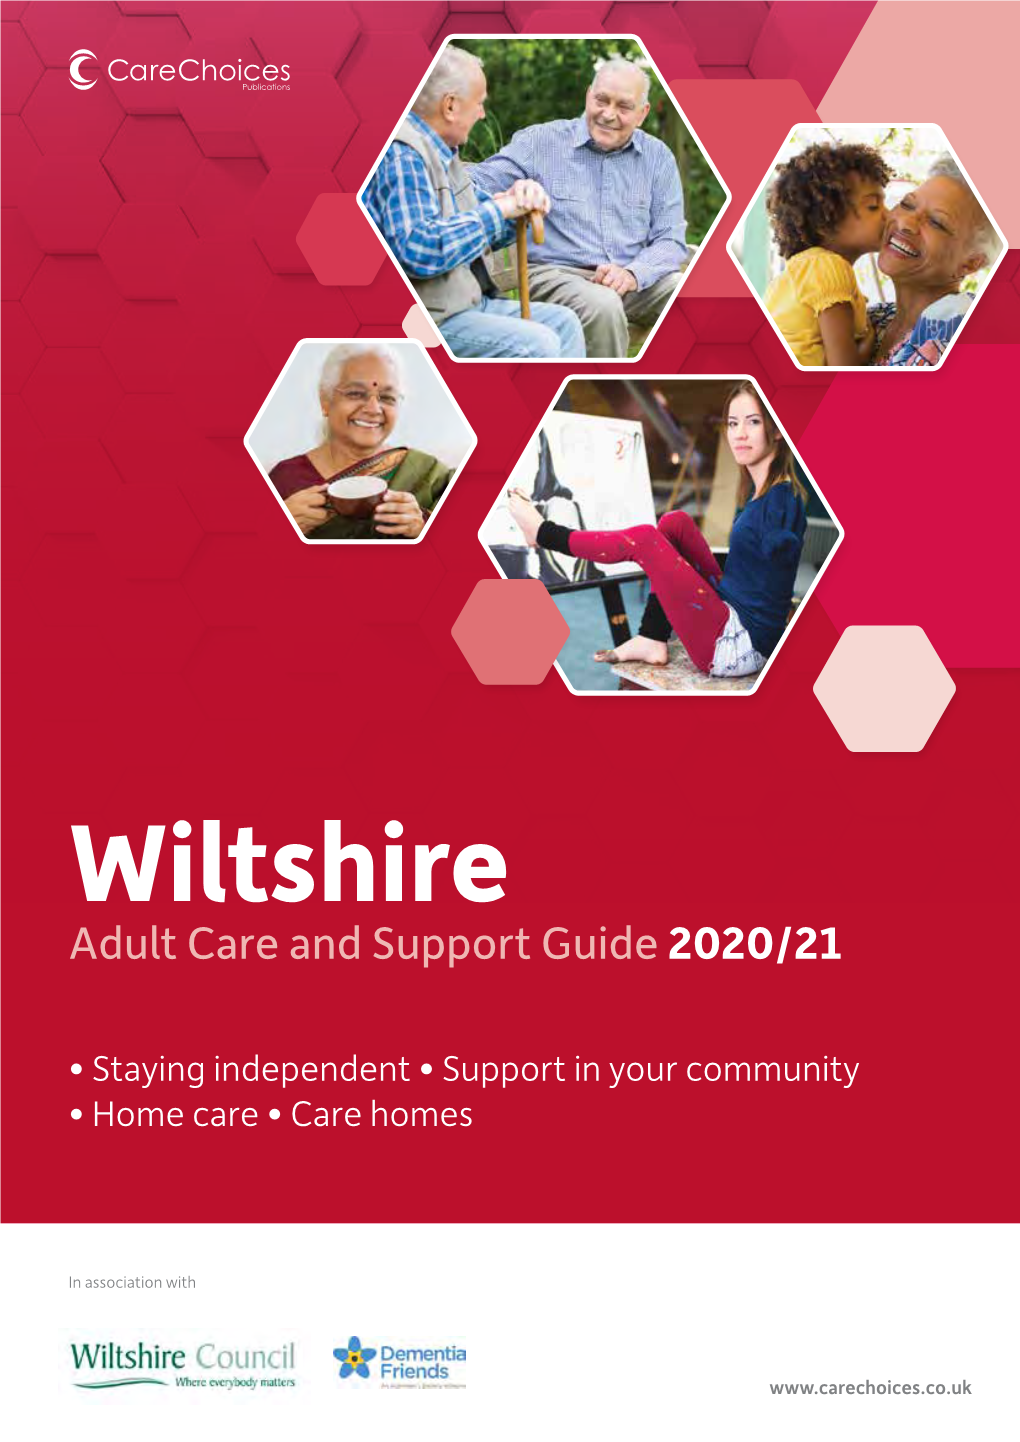 Adult Care and Support Guide 2020/21